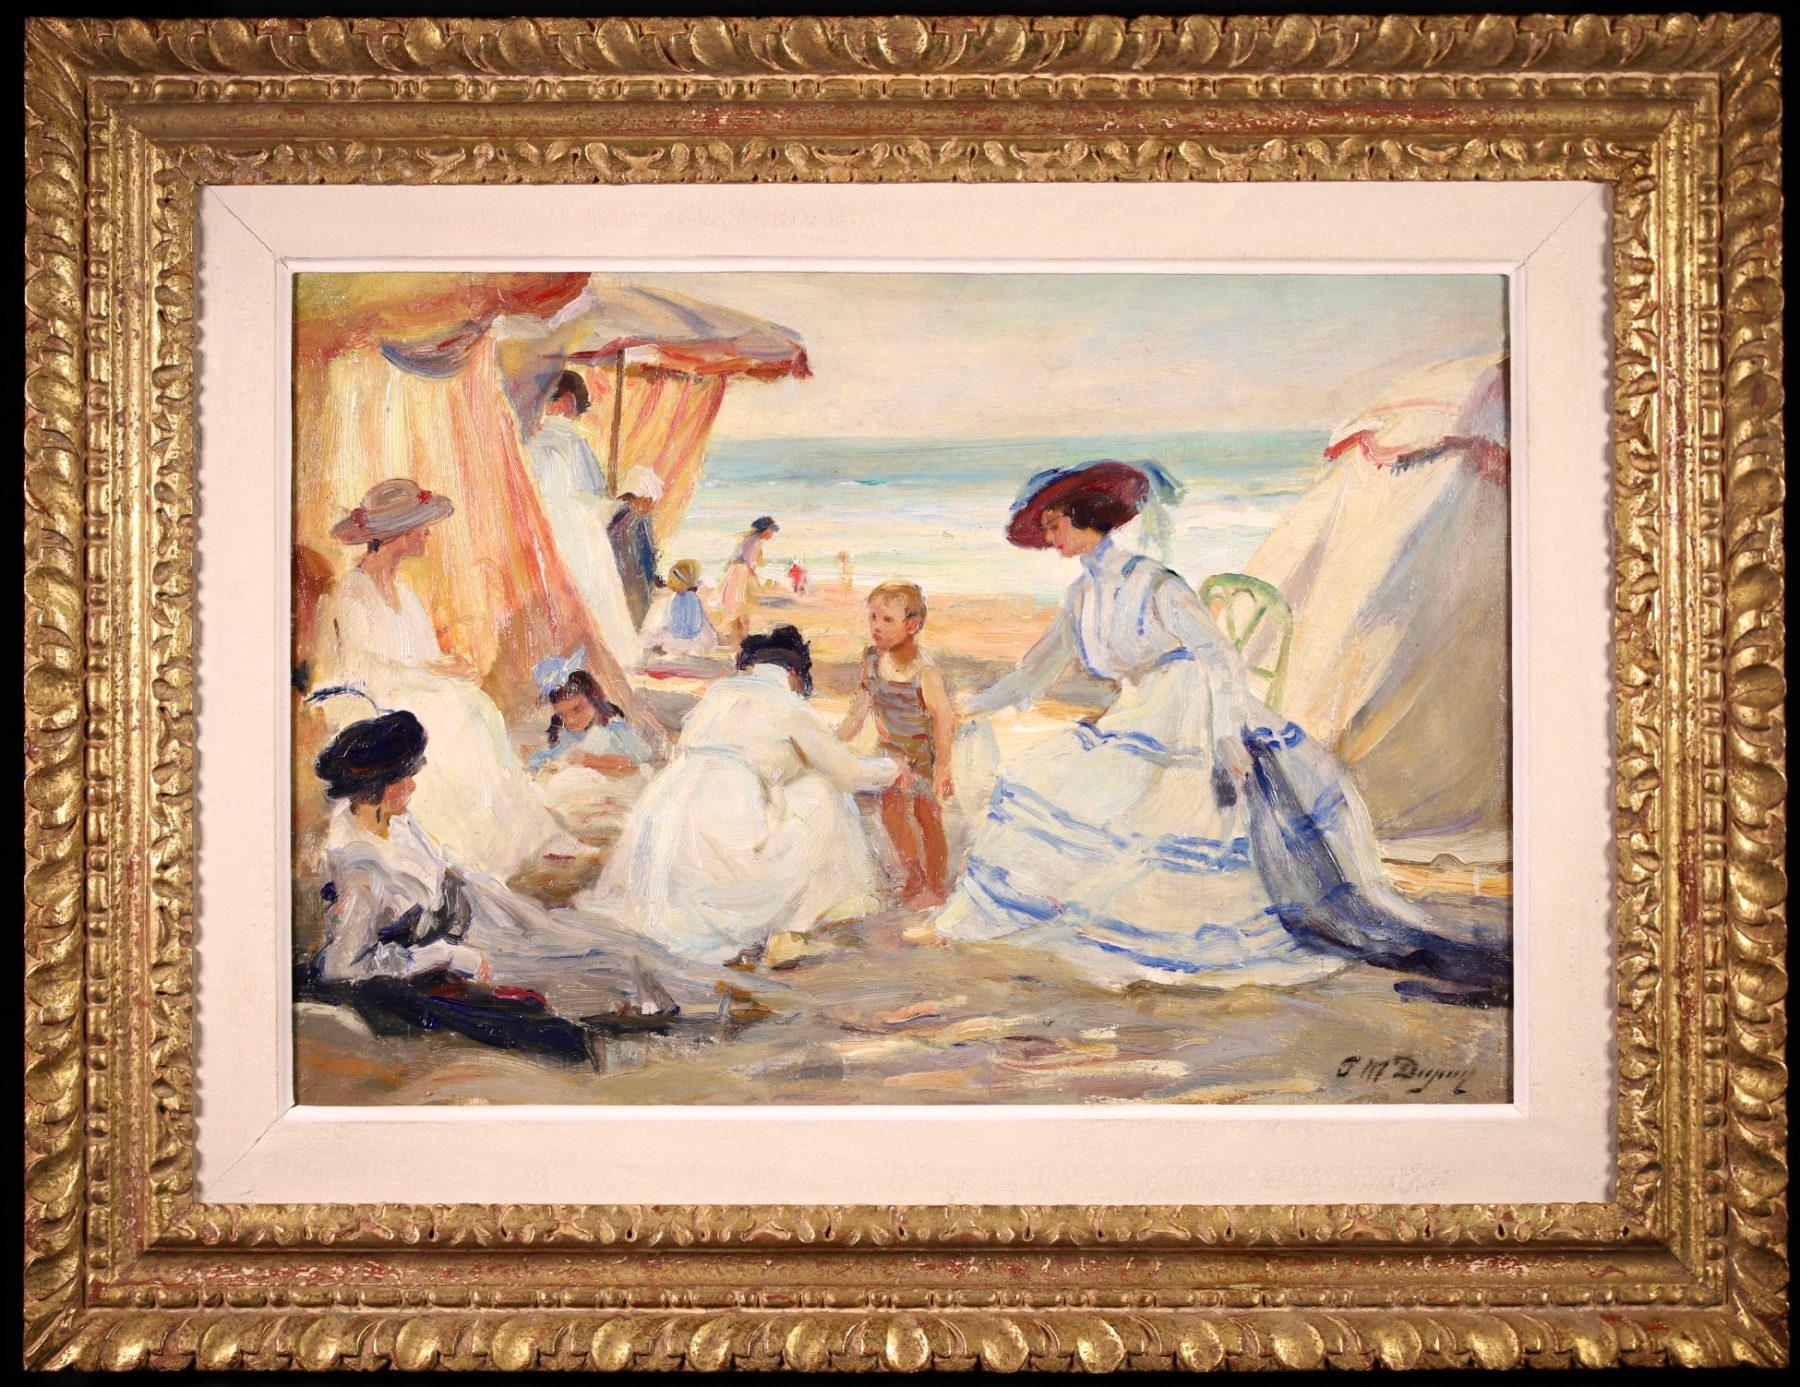 A charming oil on original canvas by French post impressionist painter Paul Michel Dupuy. The work depicts elegant ladies and children sitting on the beach shaded by tents enjoying a day at the seaside on a bright summer's day.

Signature:
Signed